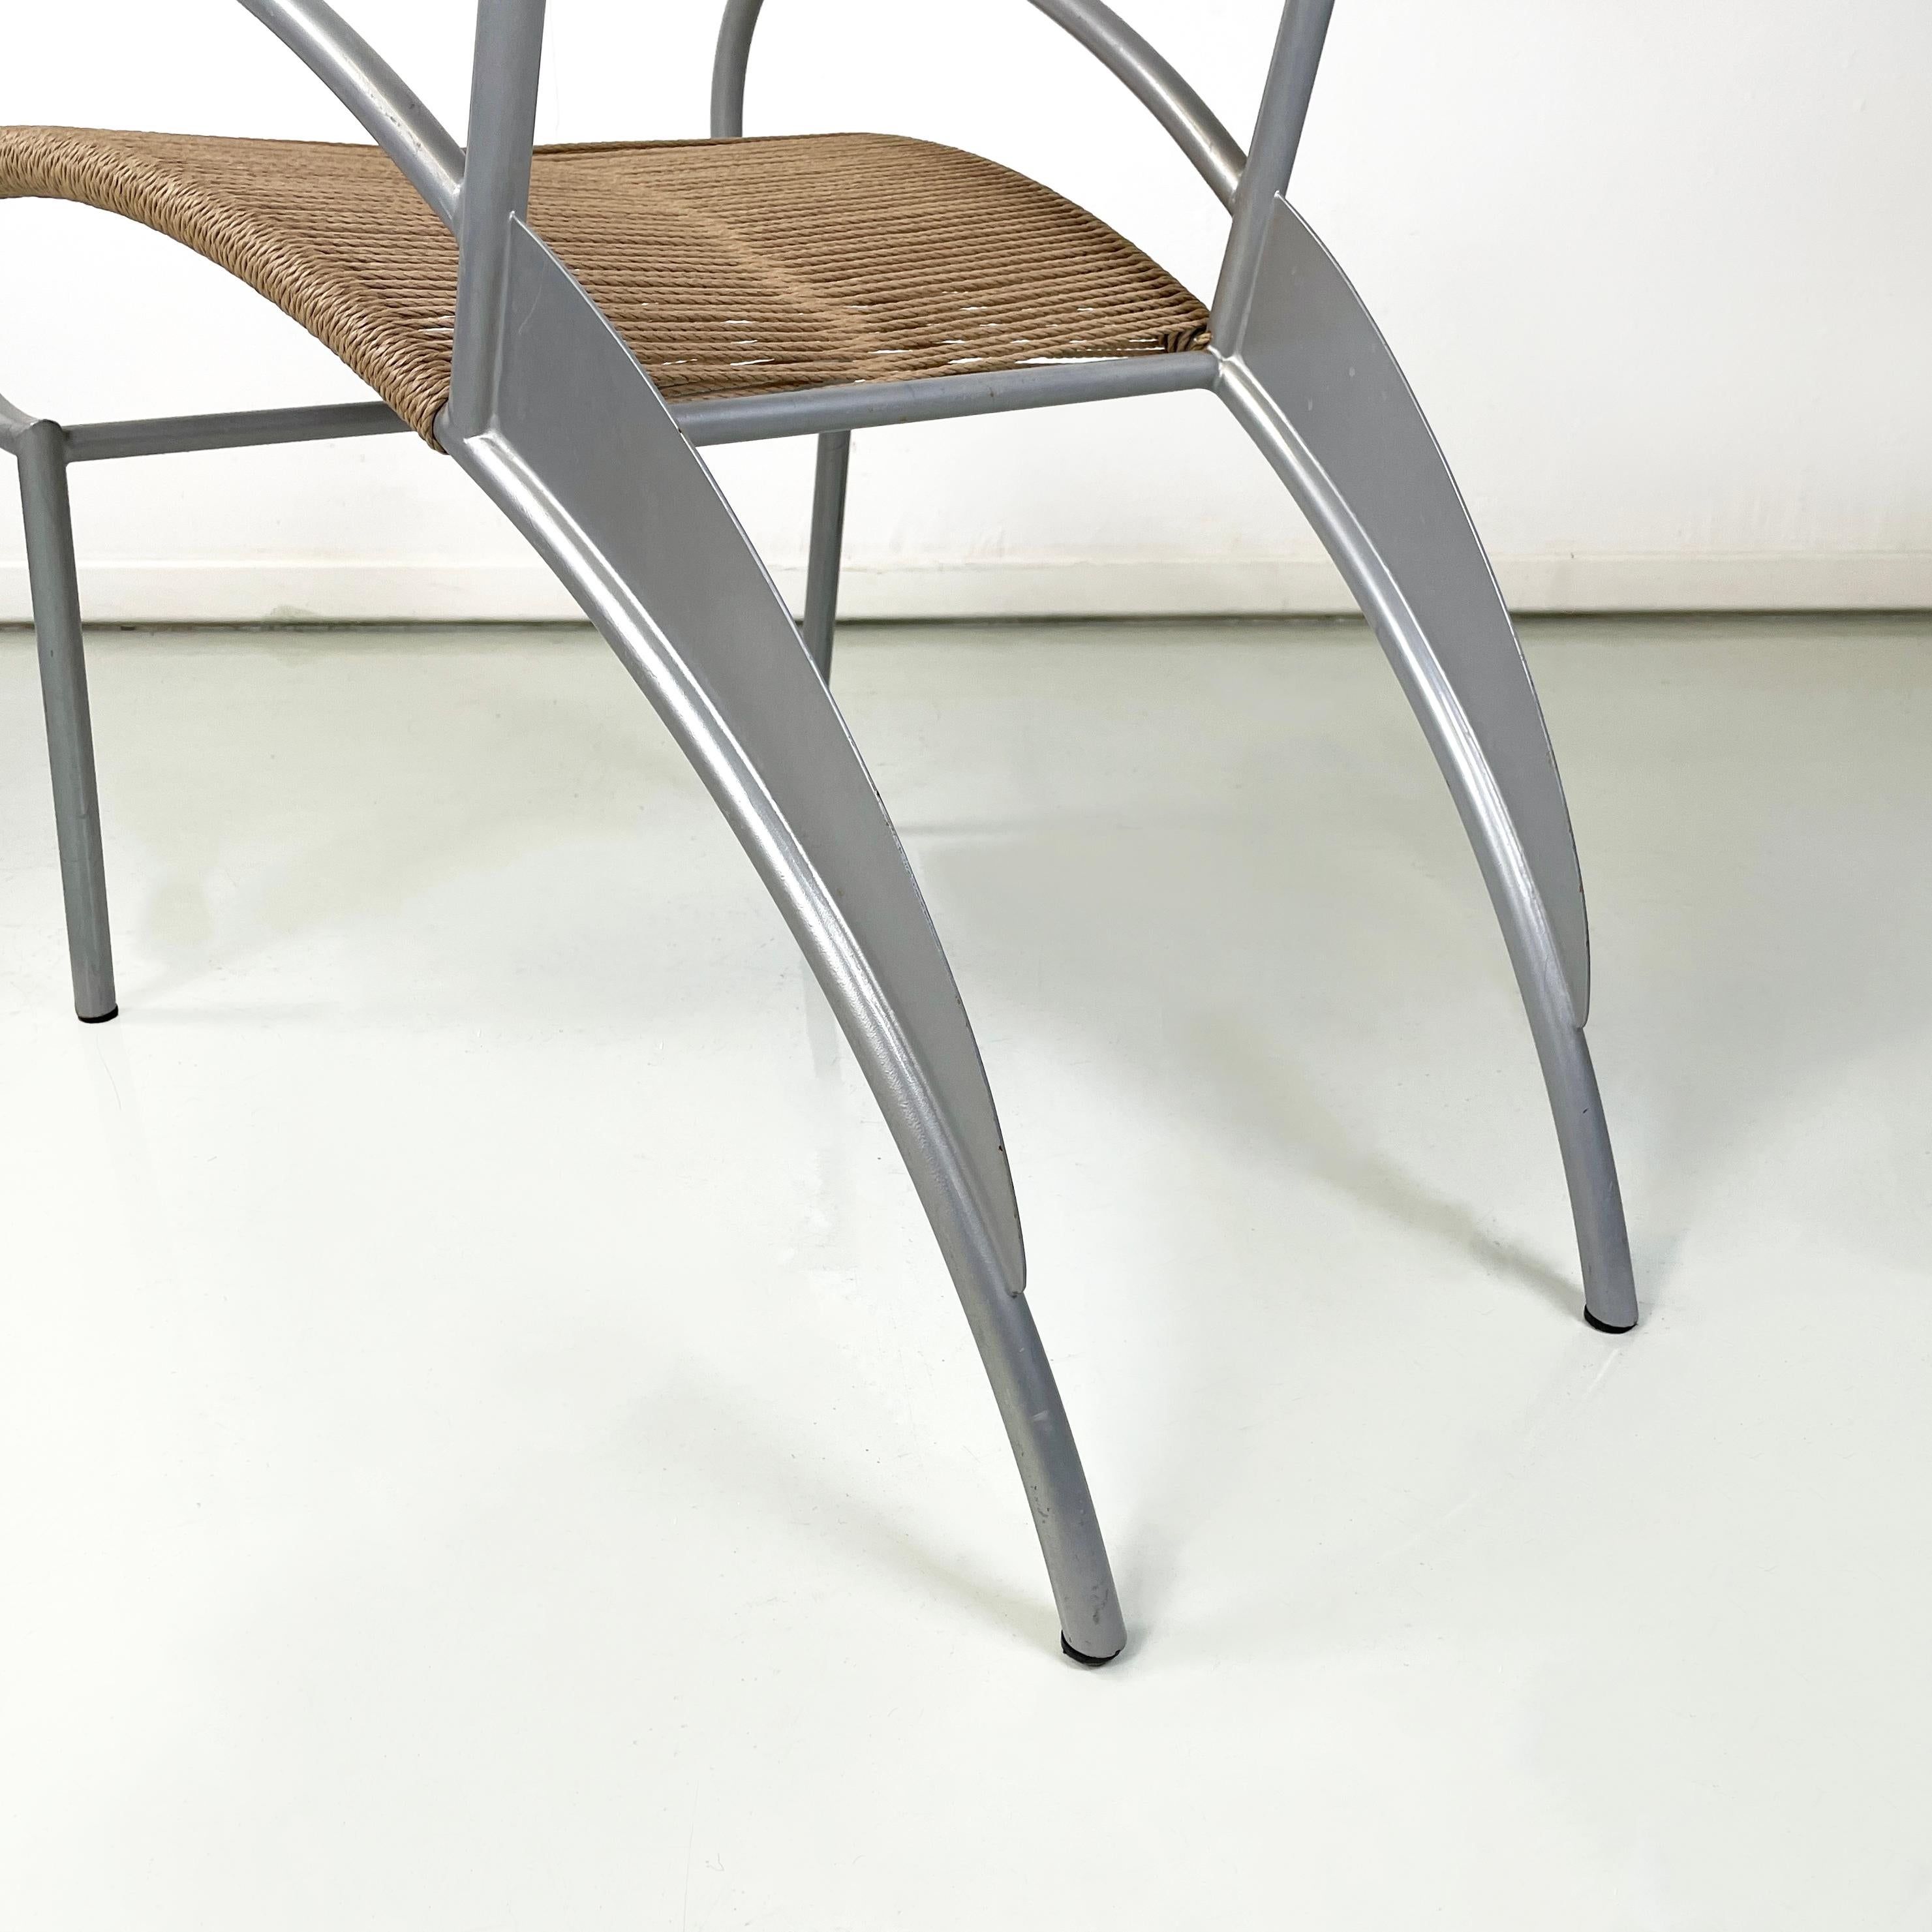 Italian modern rope and gray steel chair Juliette by Massimo Iosa-Ghini, 1990s For Sale 6